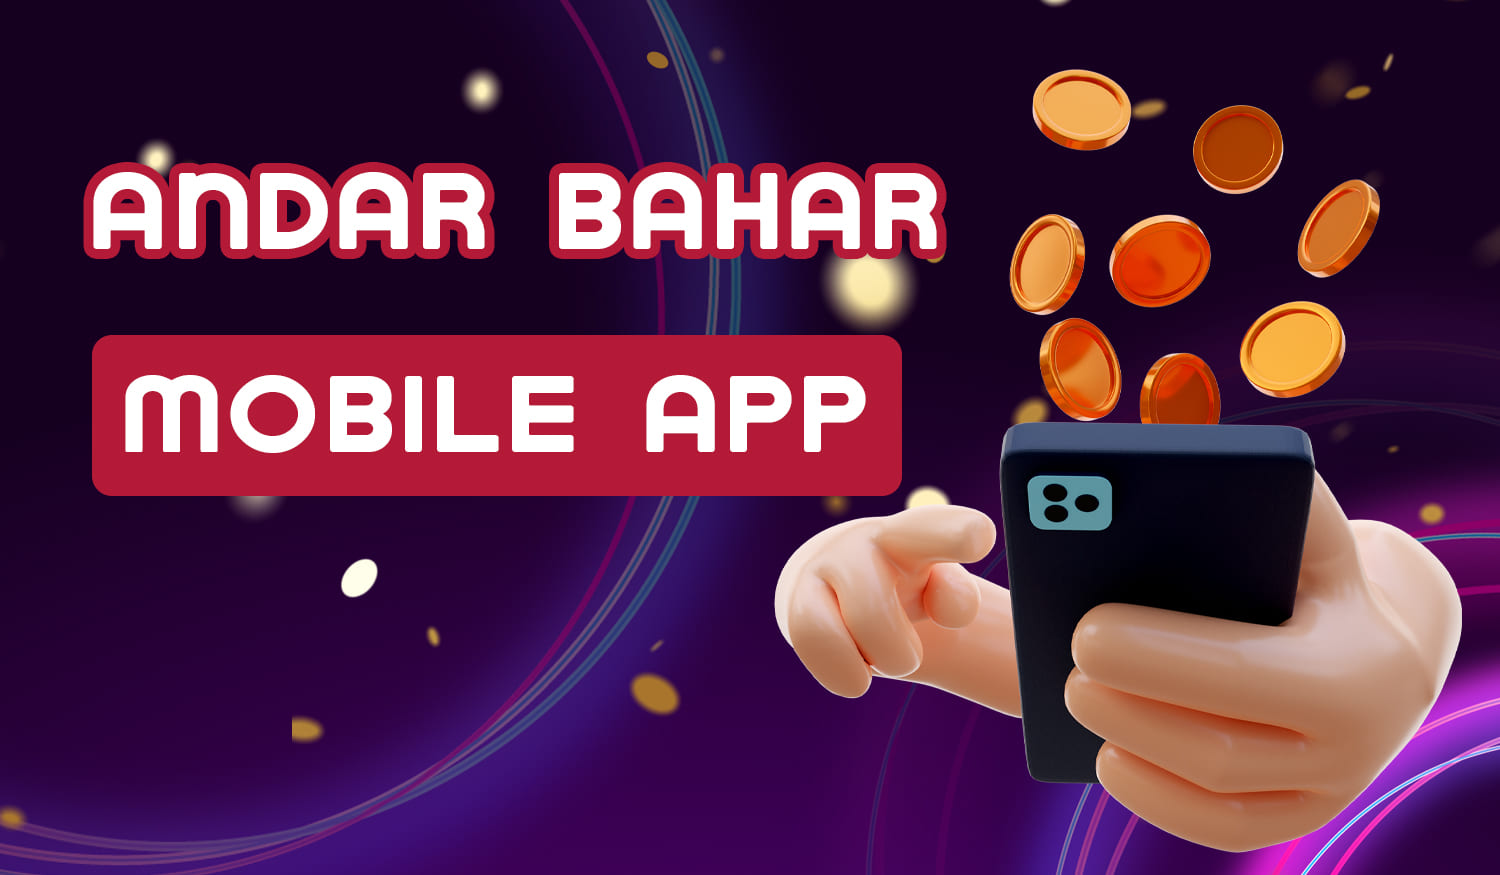 How to play Andar Bahar online using the mobile app: download and install